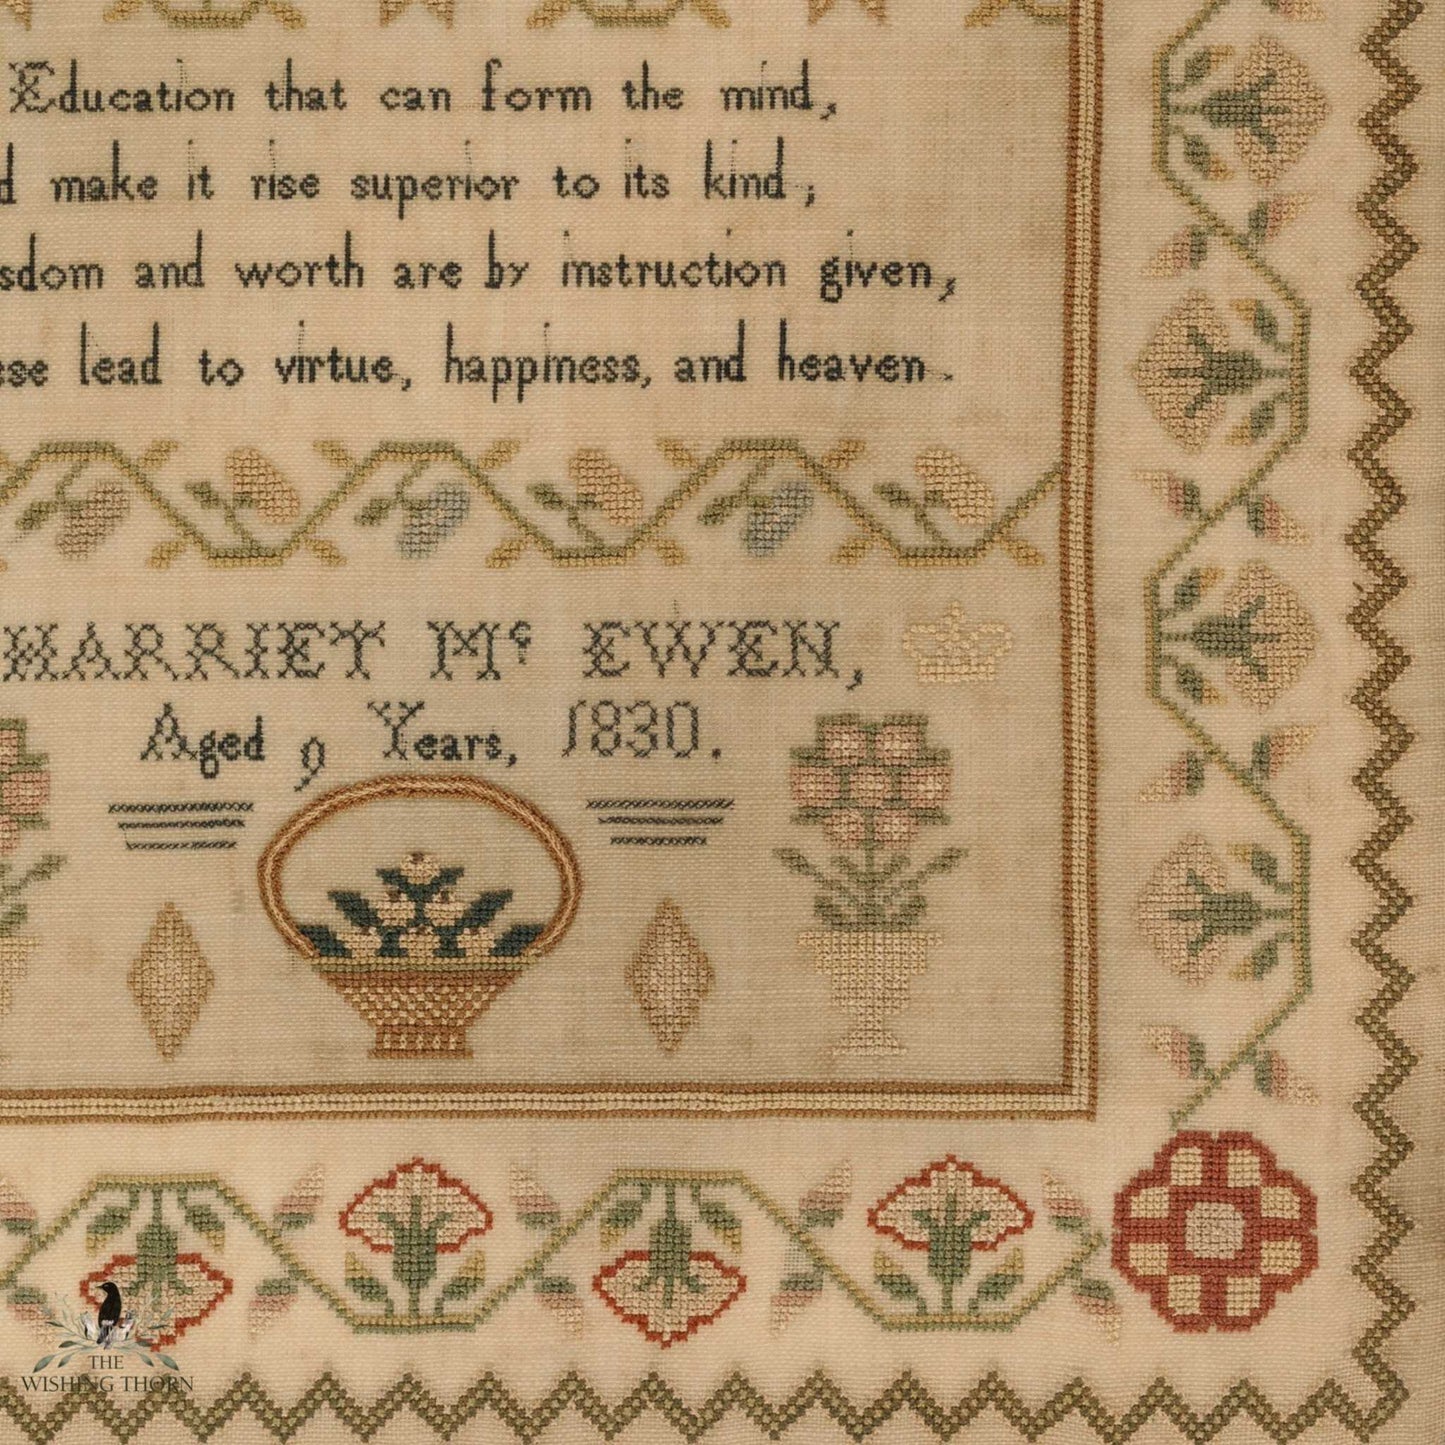 closeup of the lower right of the sampler stitched by Harriet Mc Ewen in 1830